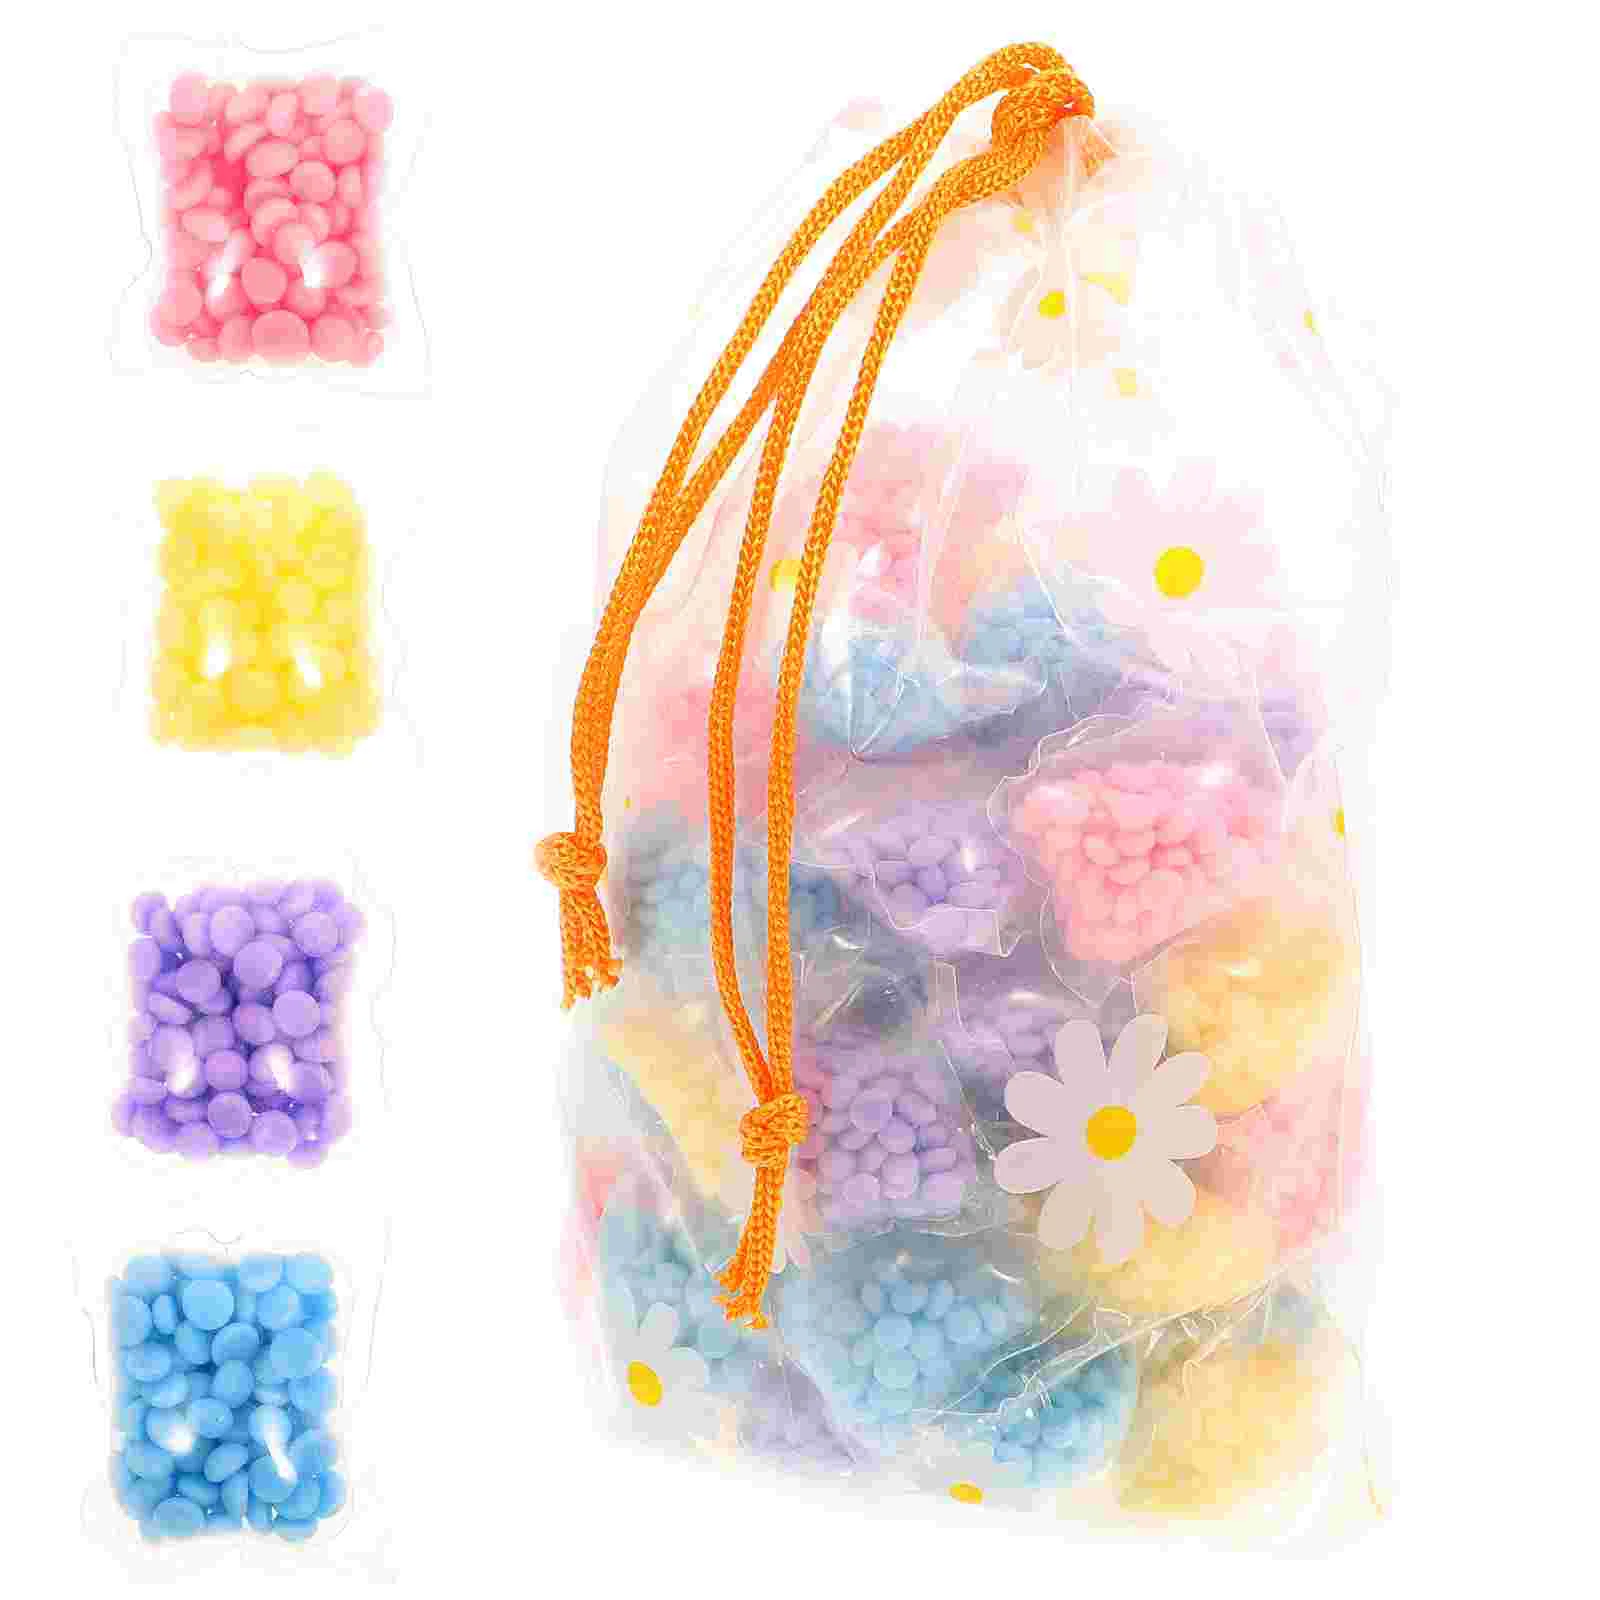 

50 Pcs Fragrance Condensate Beads Cleaning Clothes Washing Concentrate Balls Scent Lavender Laundry Tools Softener Concentrated